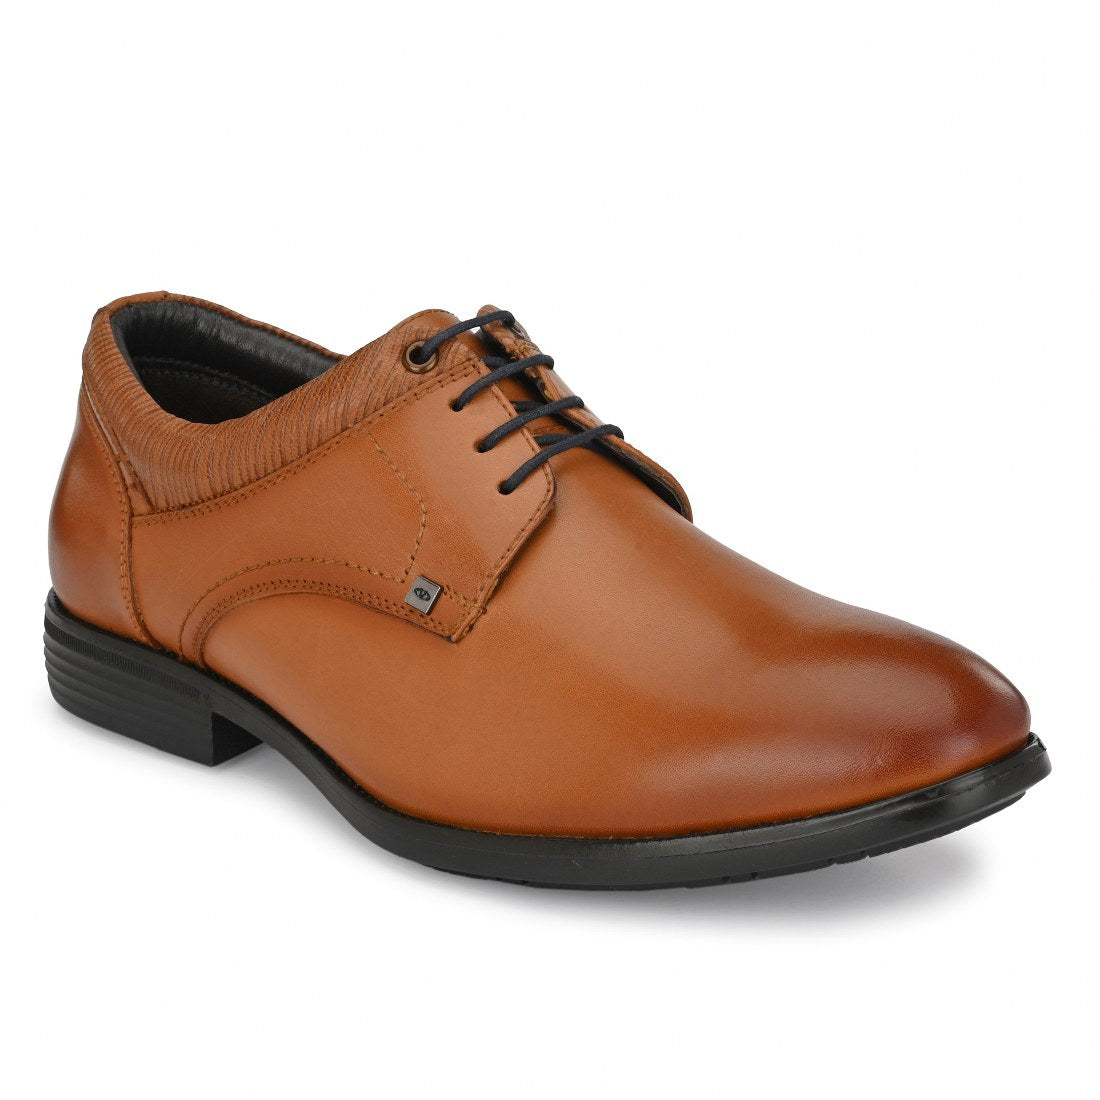 COSMO-55 MEN LEATHER TAN FORMAL LACE UP DERBY